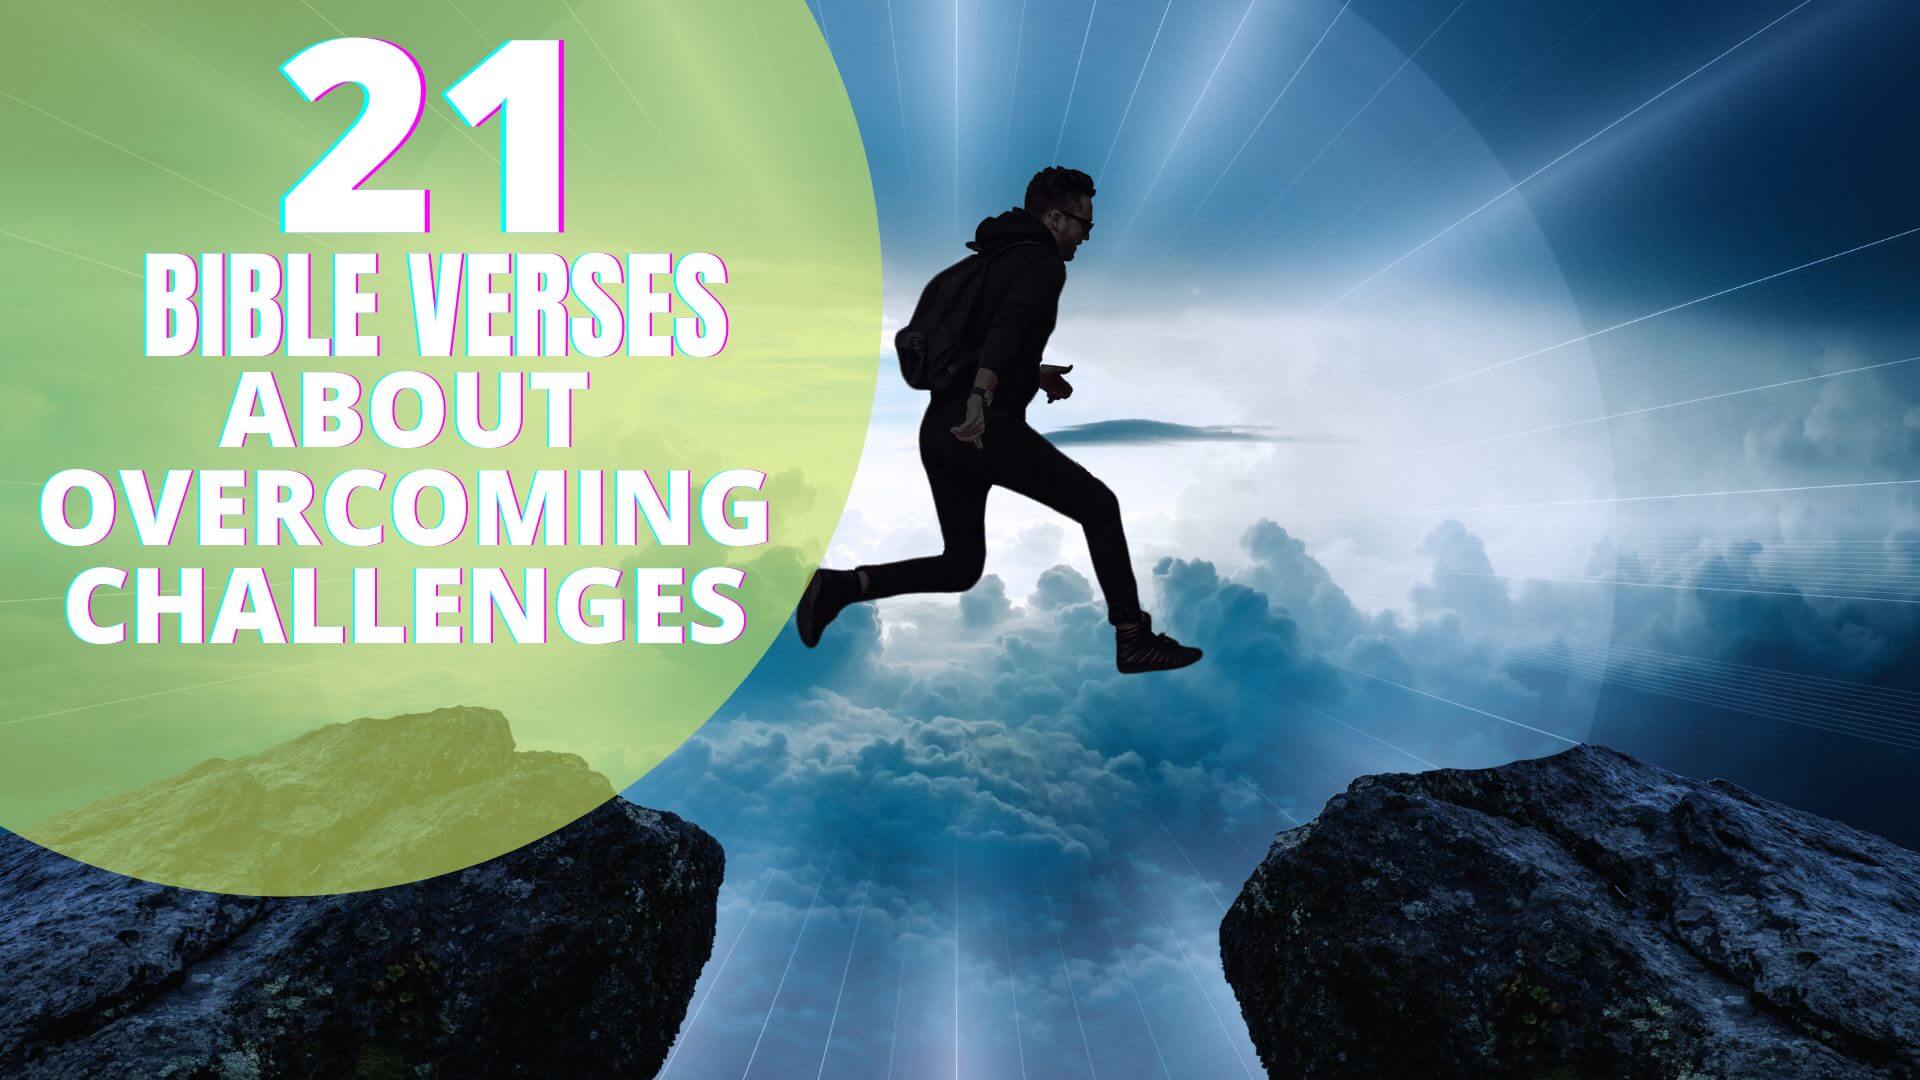 Bible verses about overcoming challenges